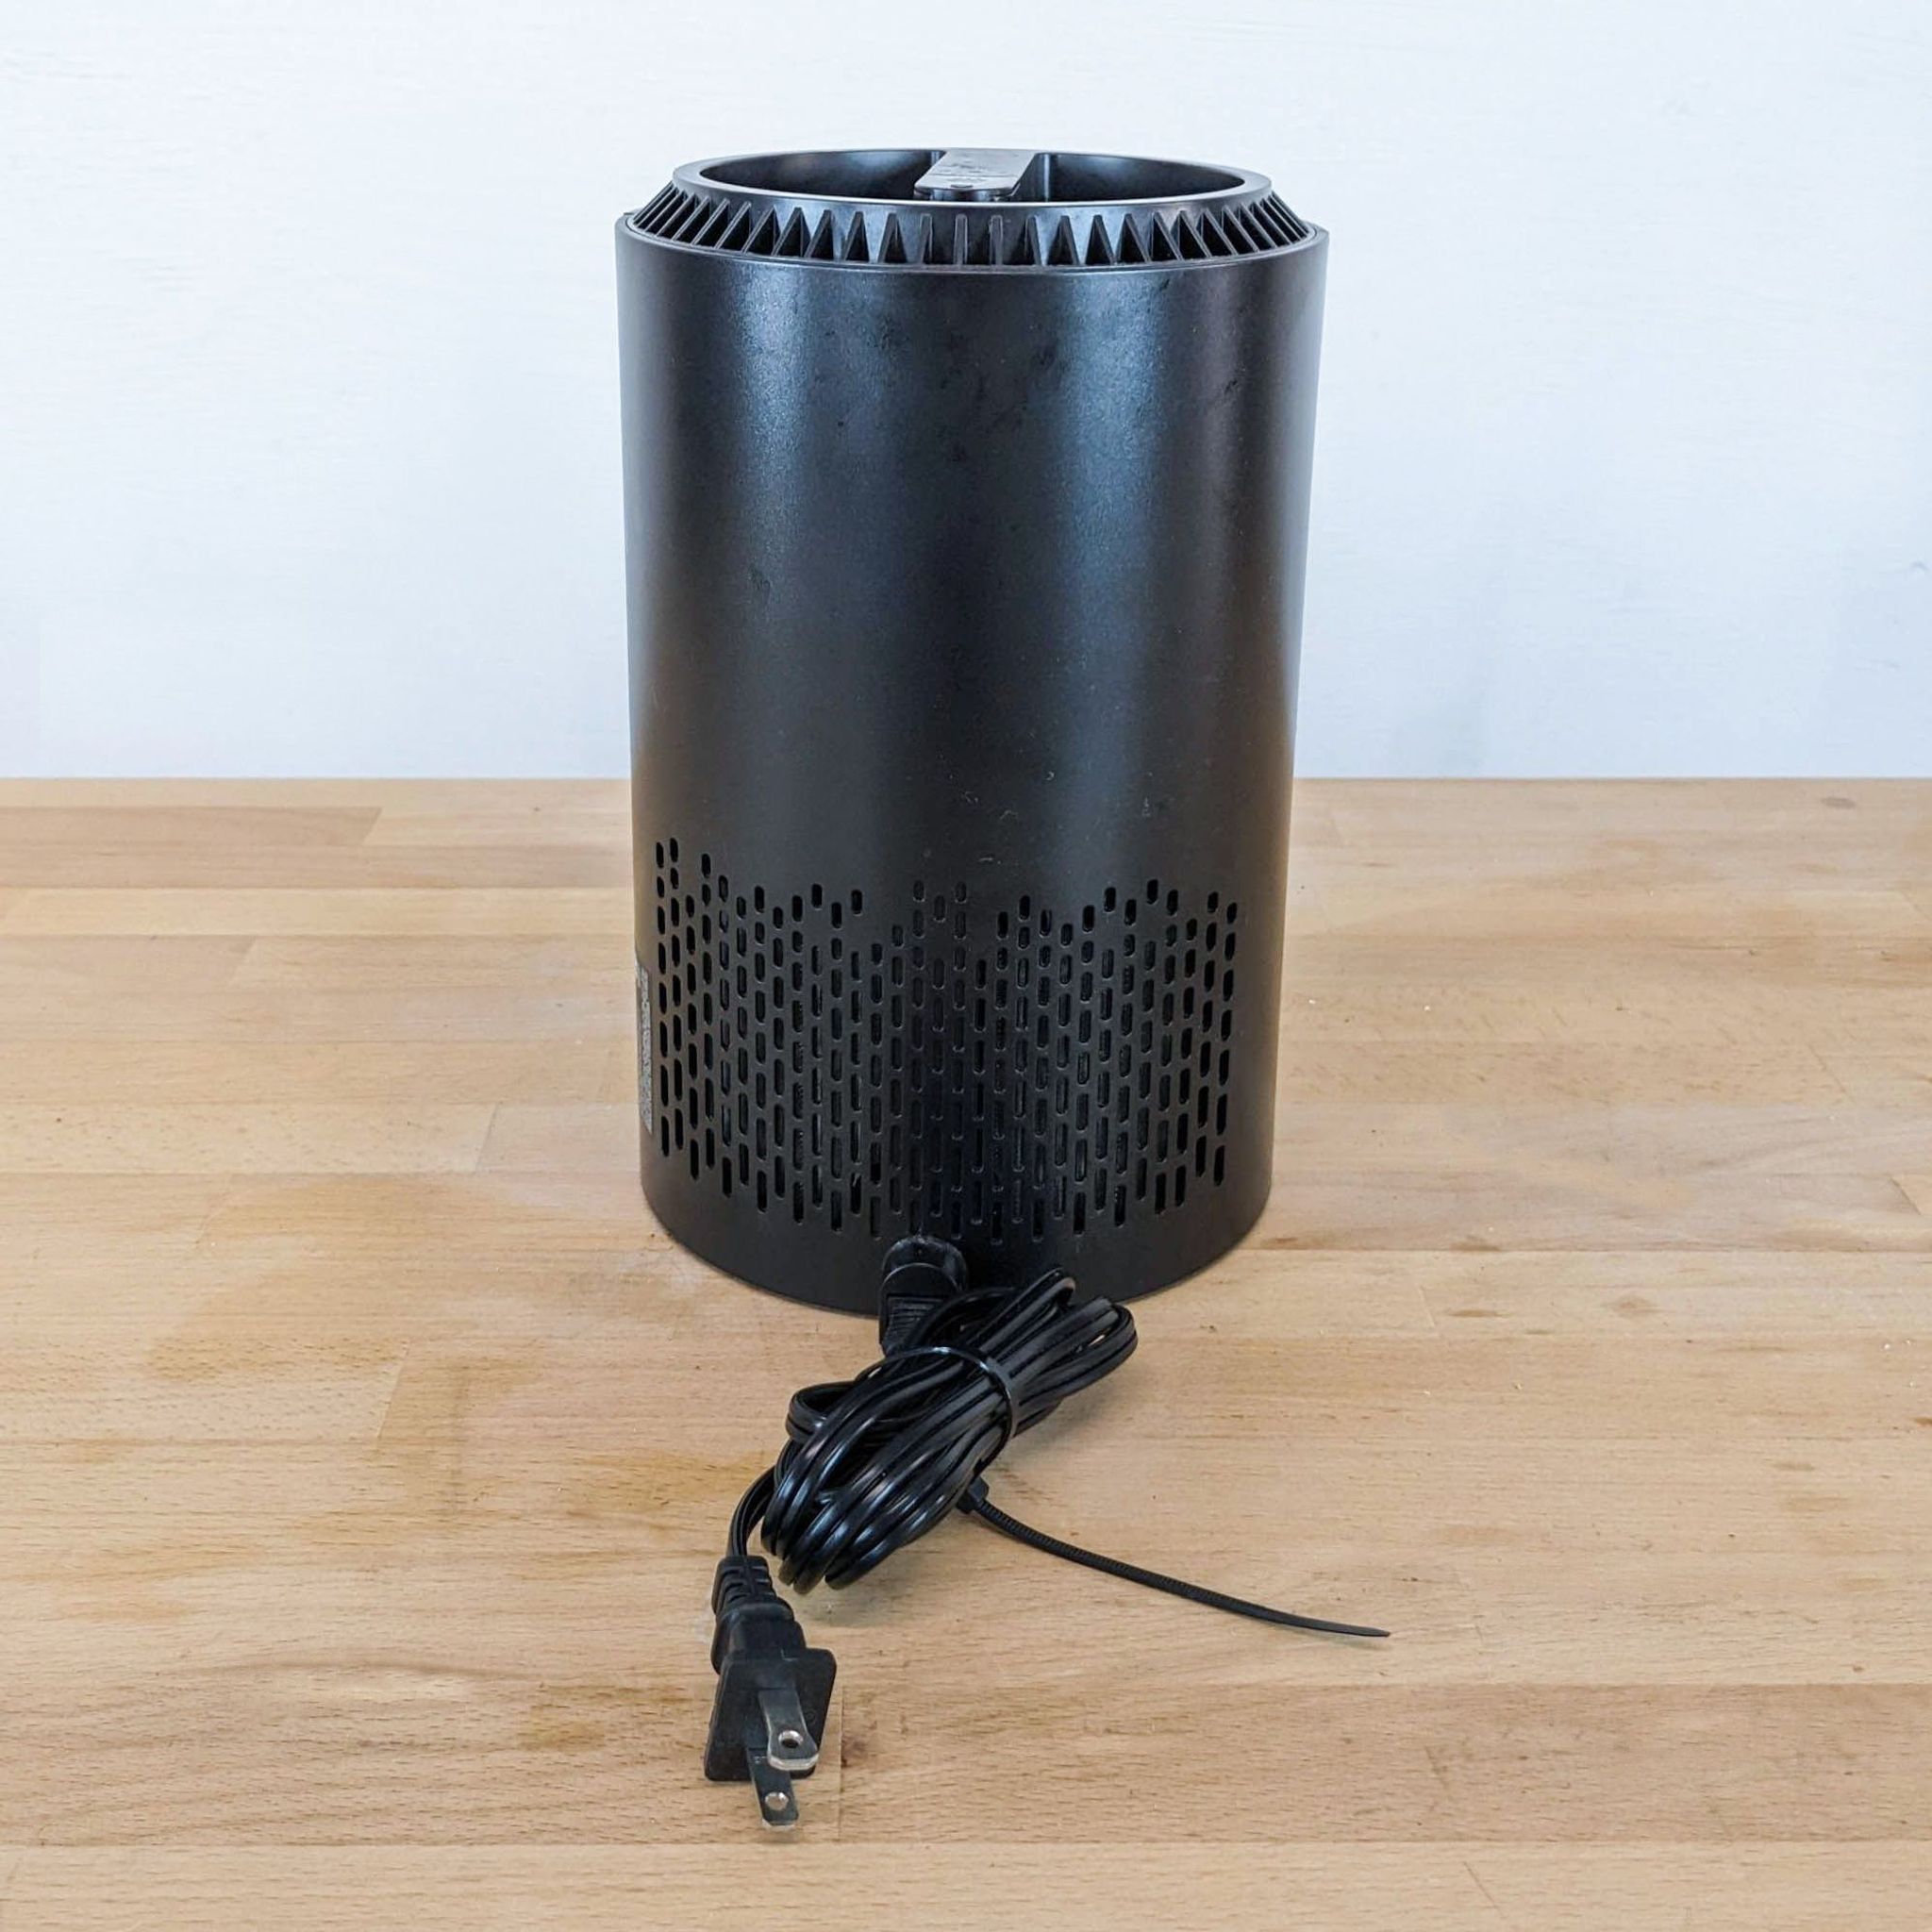 Alt text 2: Black Reperch device with power cord, vented top, and perforated design, displayed on wooden table.